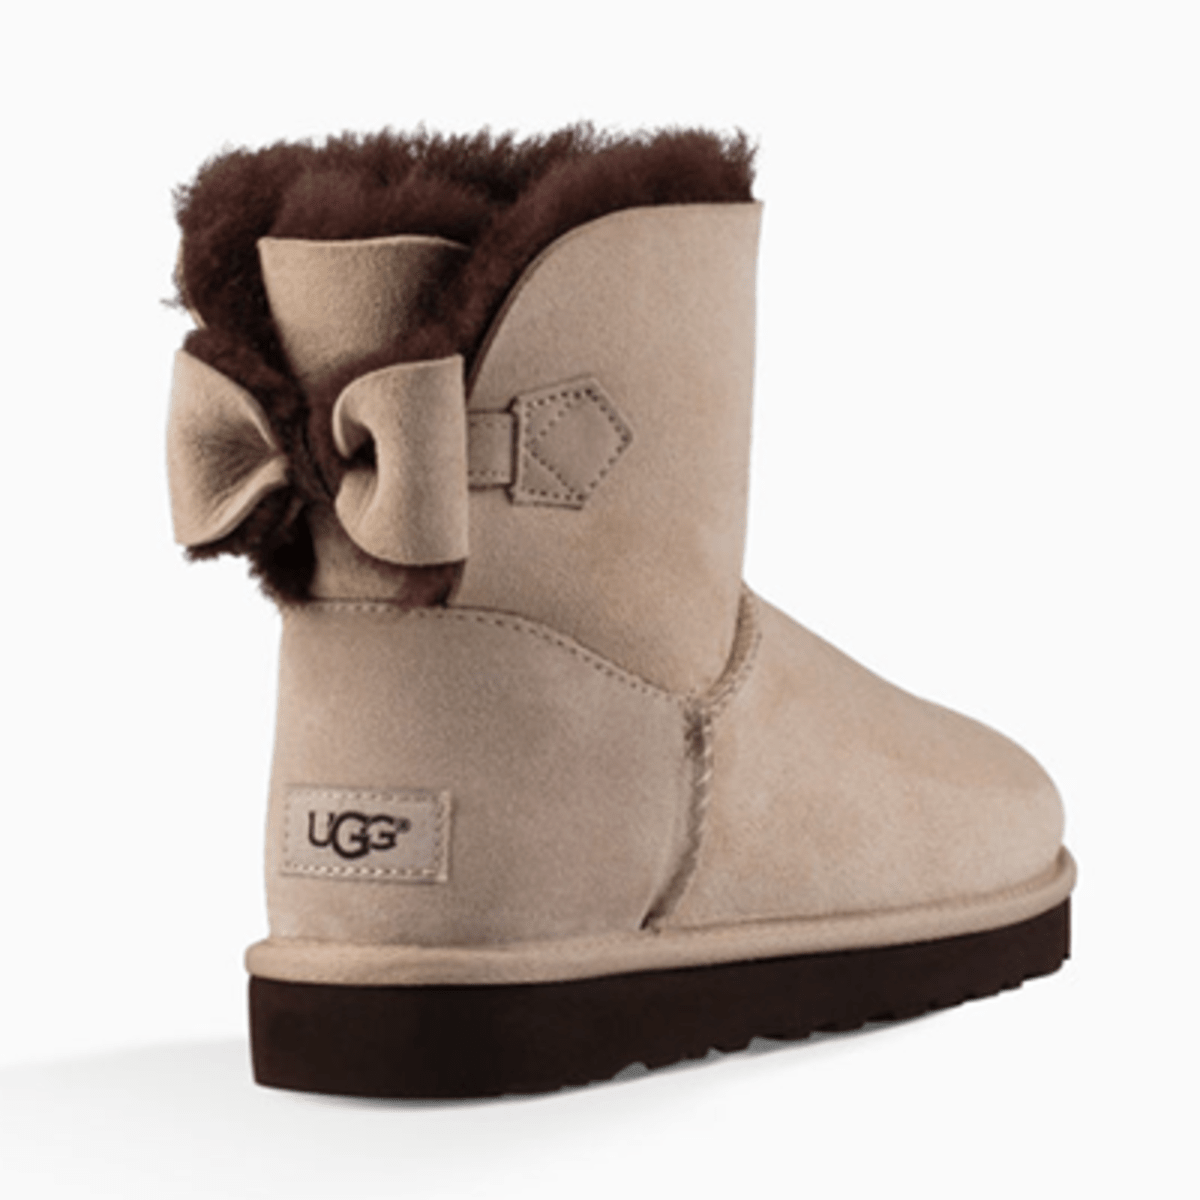 sell ugg boots